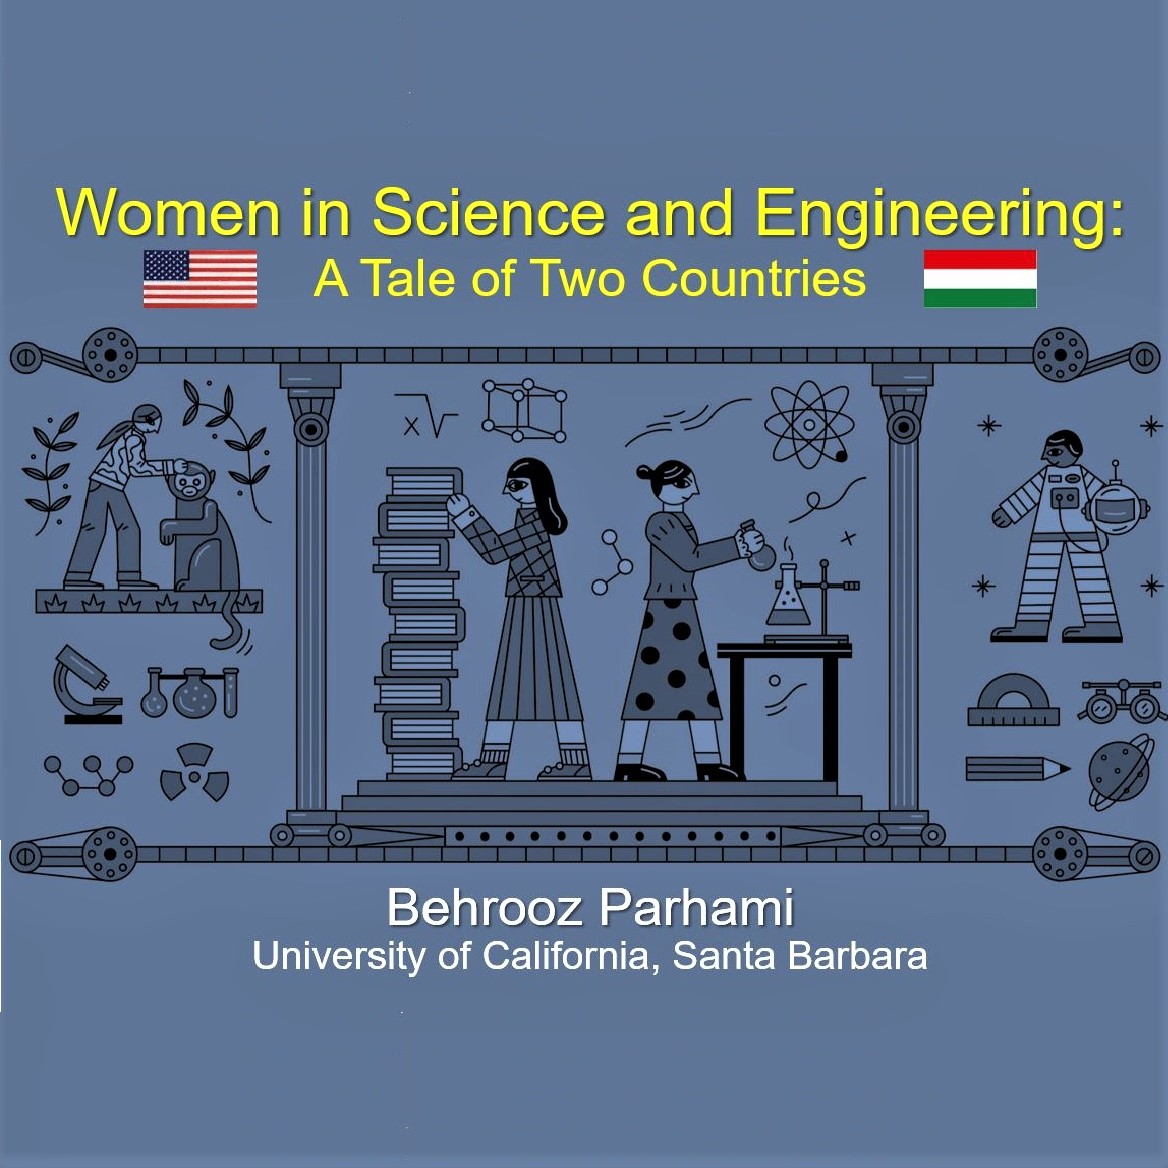 Title slide for my presentation on 'Women in Science and Engineering: A Tale of Two Countries'